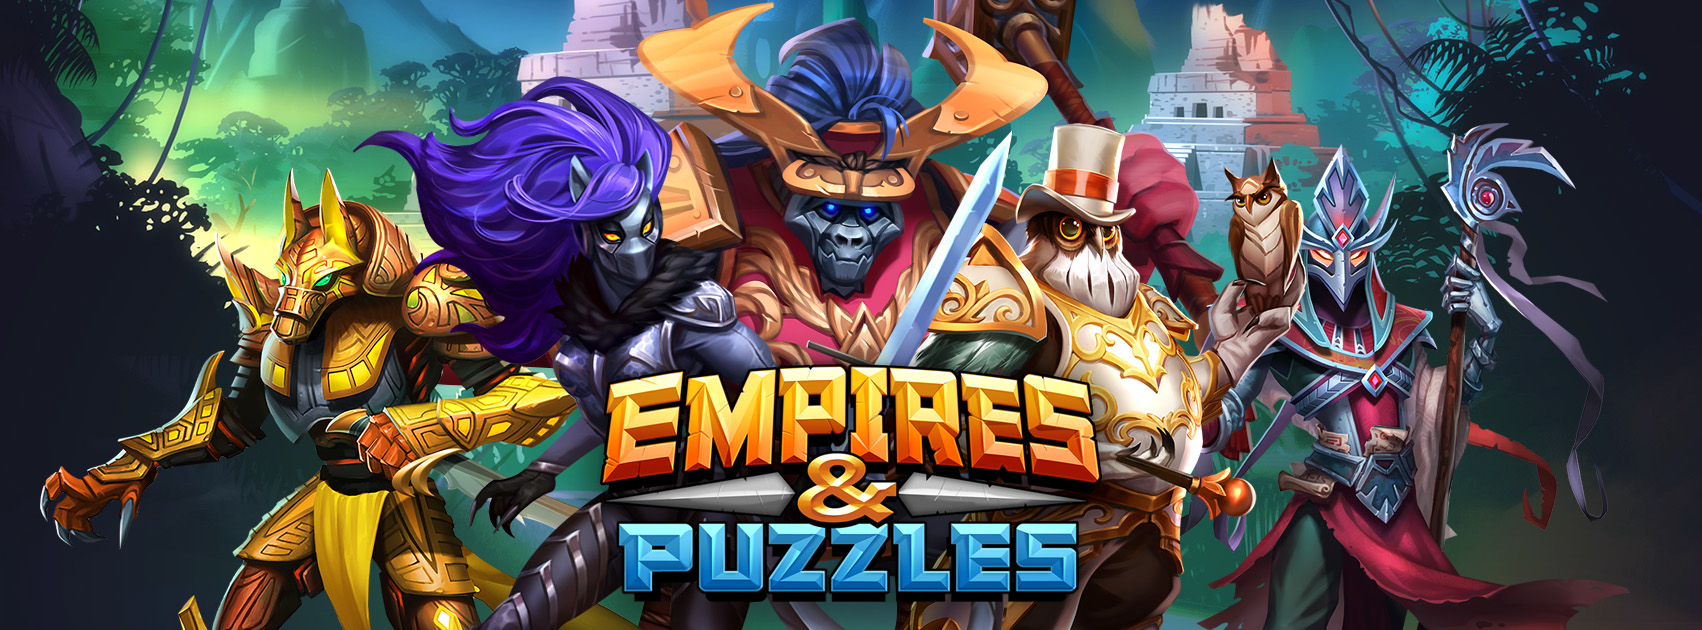 empires and puzzles hero academy